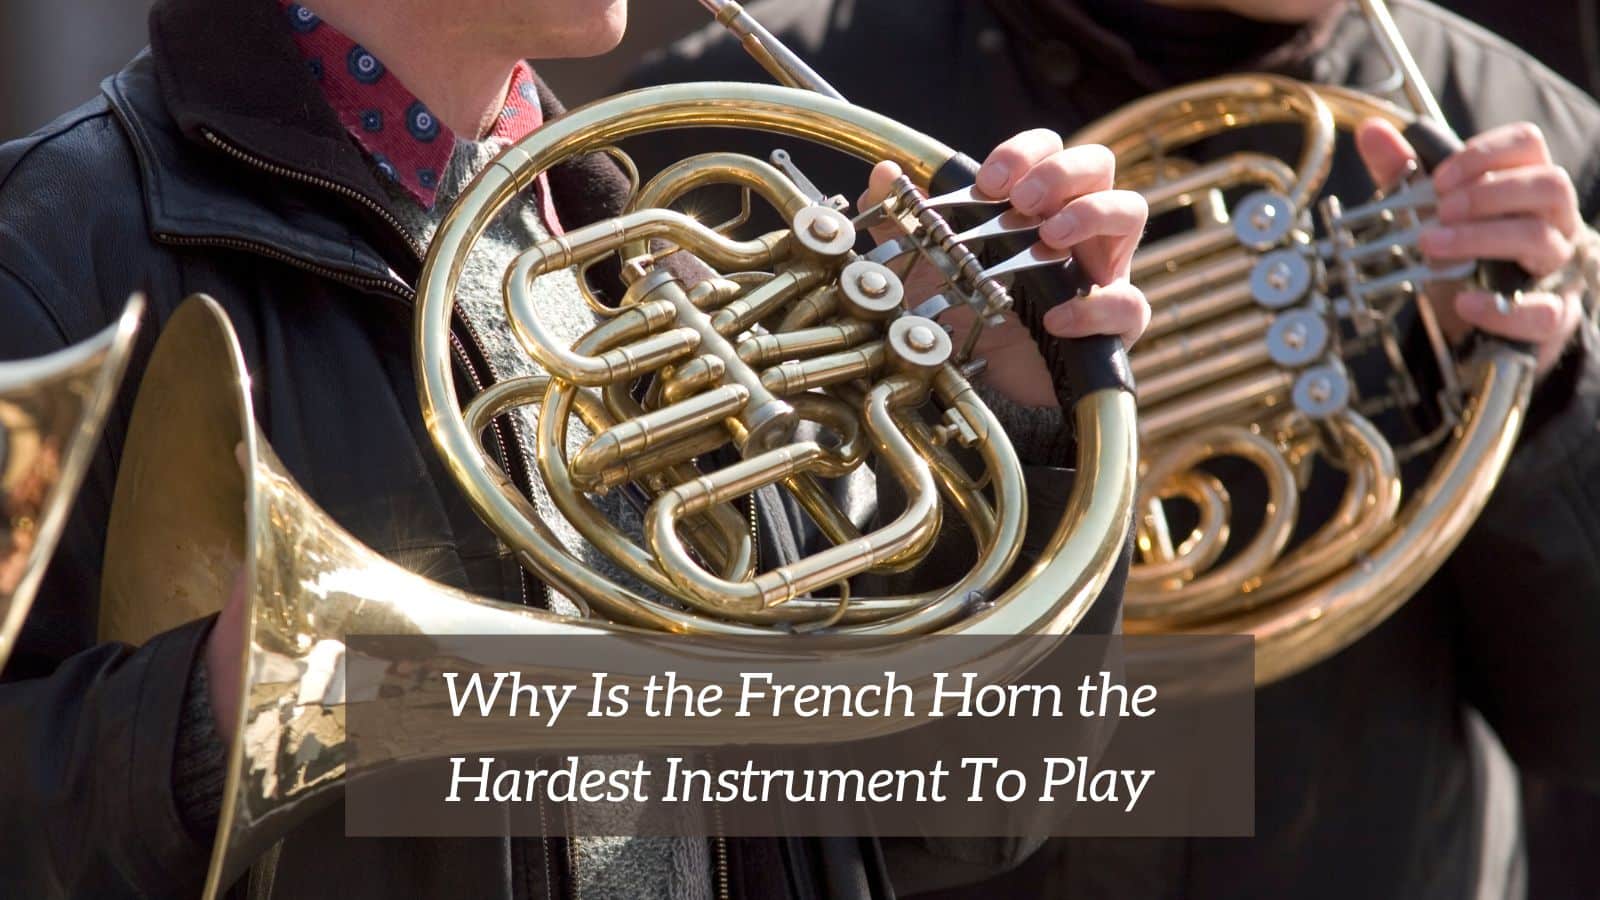 Why Is the French Horn the Hardest Instrument To Play